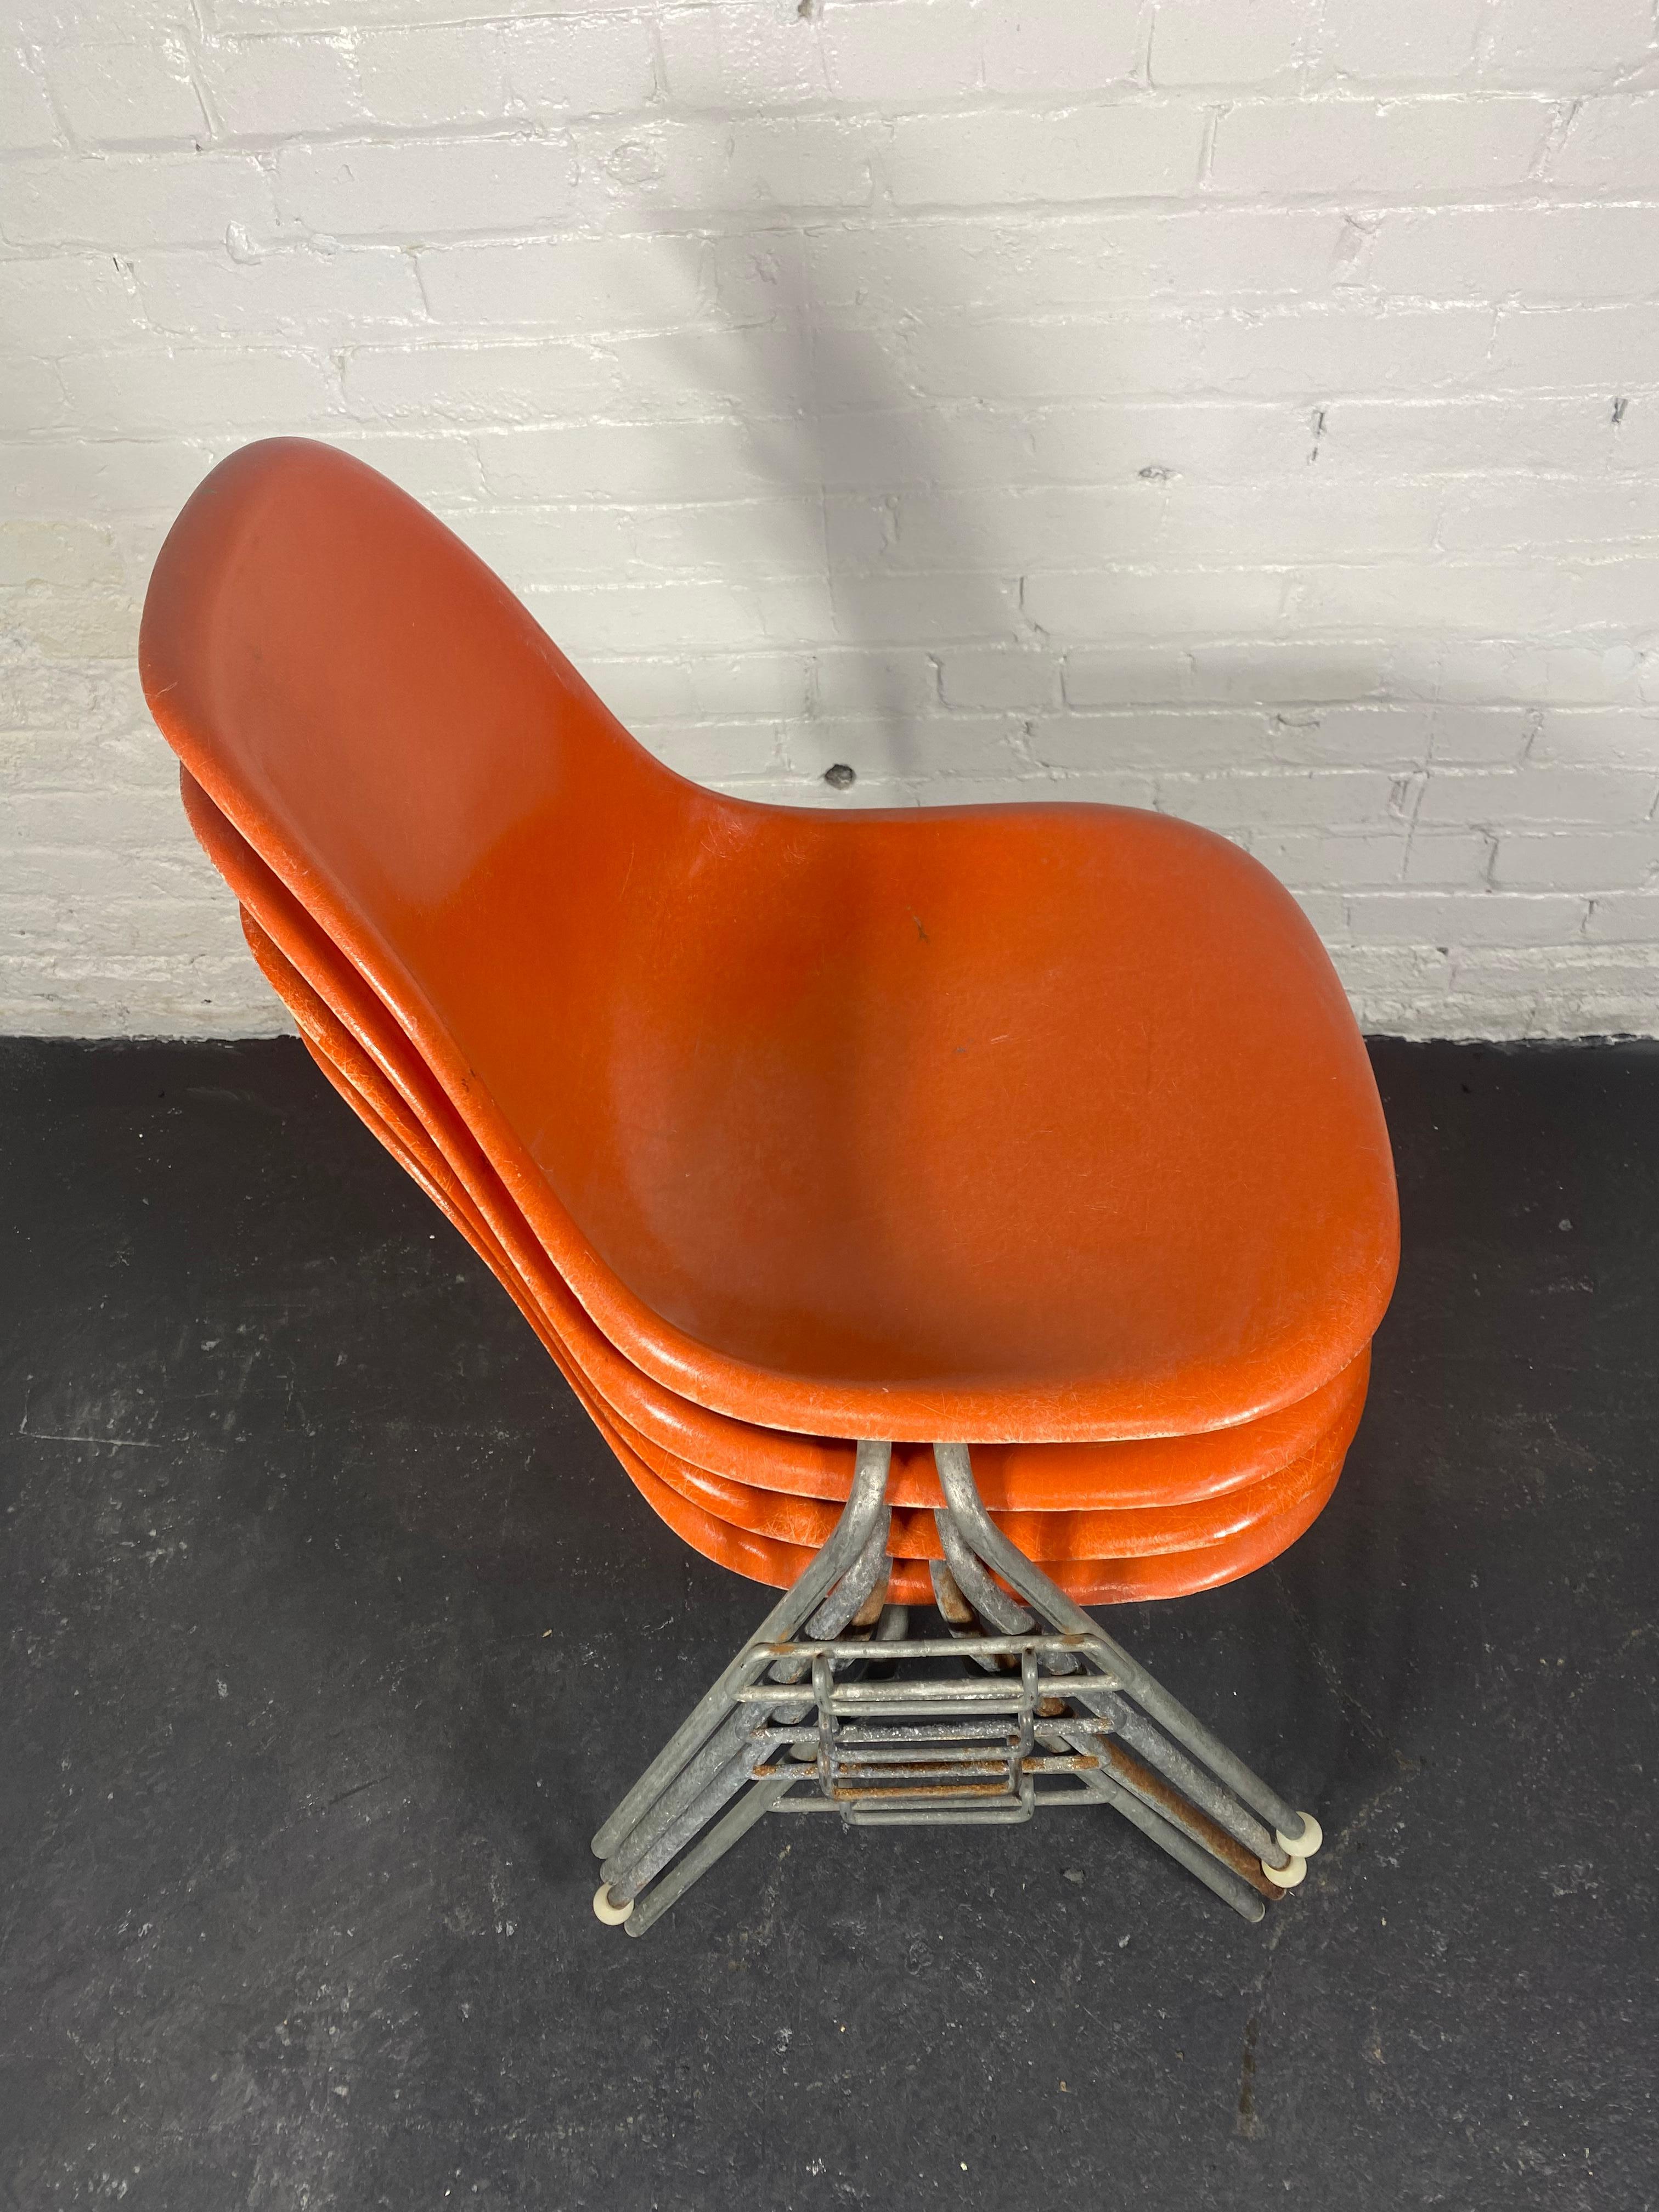 SET 4 DSS Stacking Chairs, Charles & Ray Eames, Herman Miller, Orange Fiberglass For Sale 3